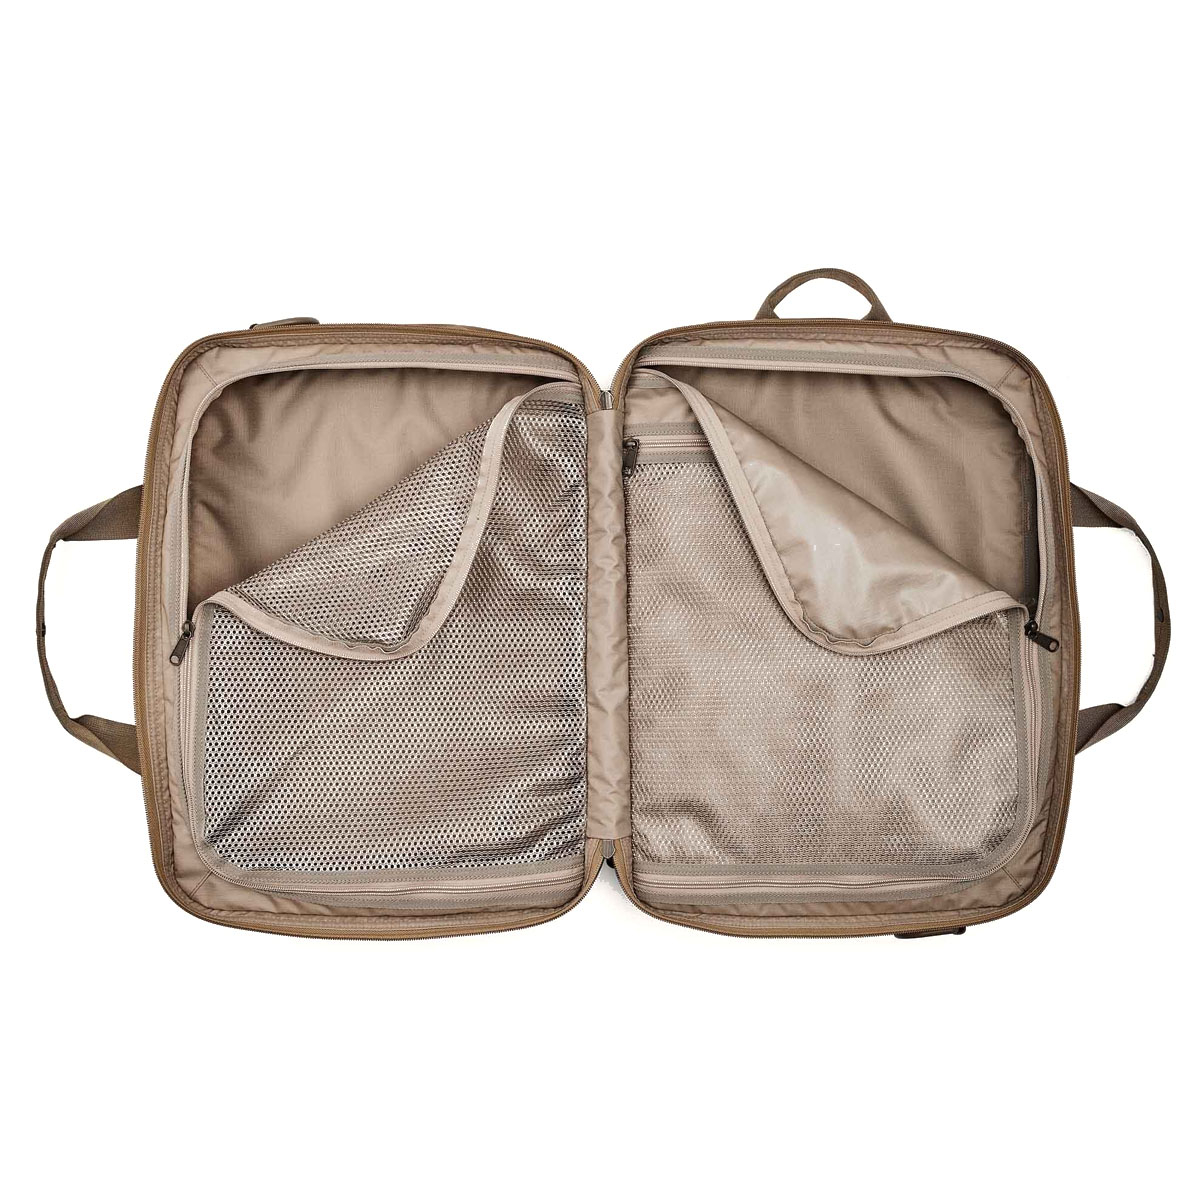 Filson Surveyor Pullman Pack Dark Tan/Flame, features a U-shaped zipper for full visibility and easy access